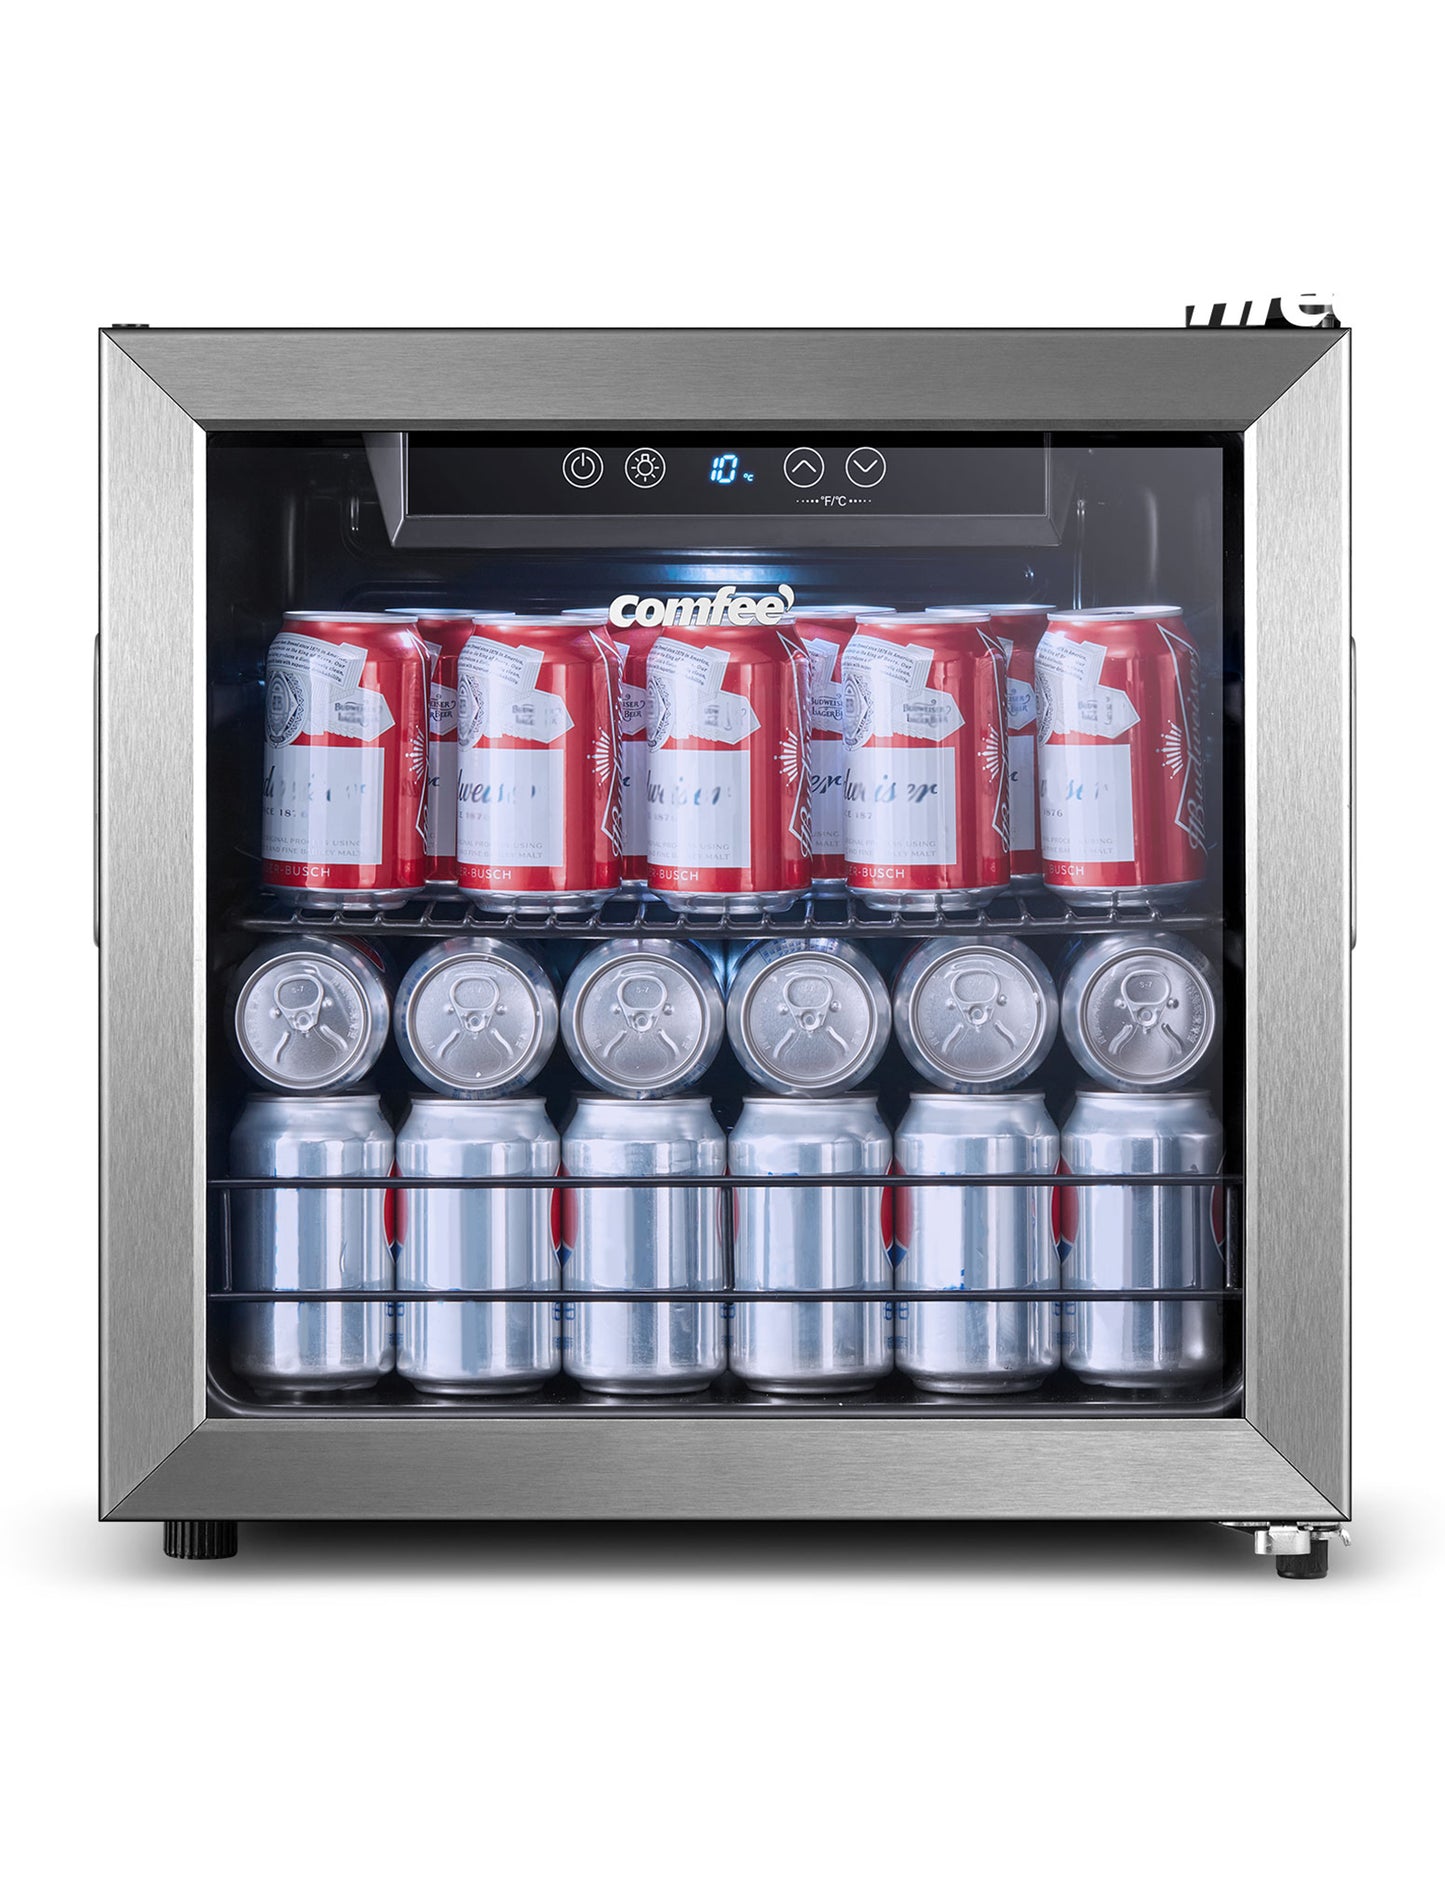 comfee mini beverage cooler refrigerator with cans of soda inside